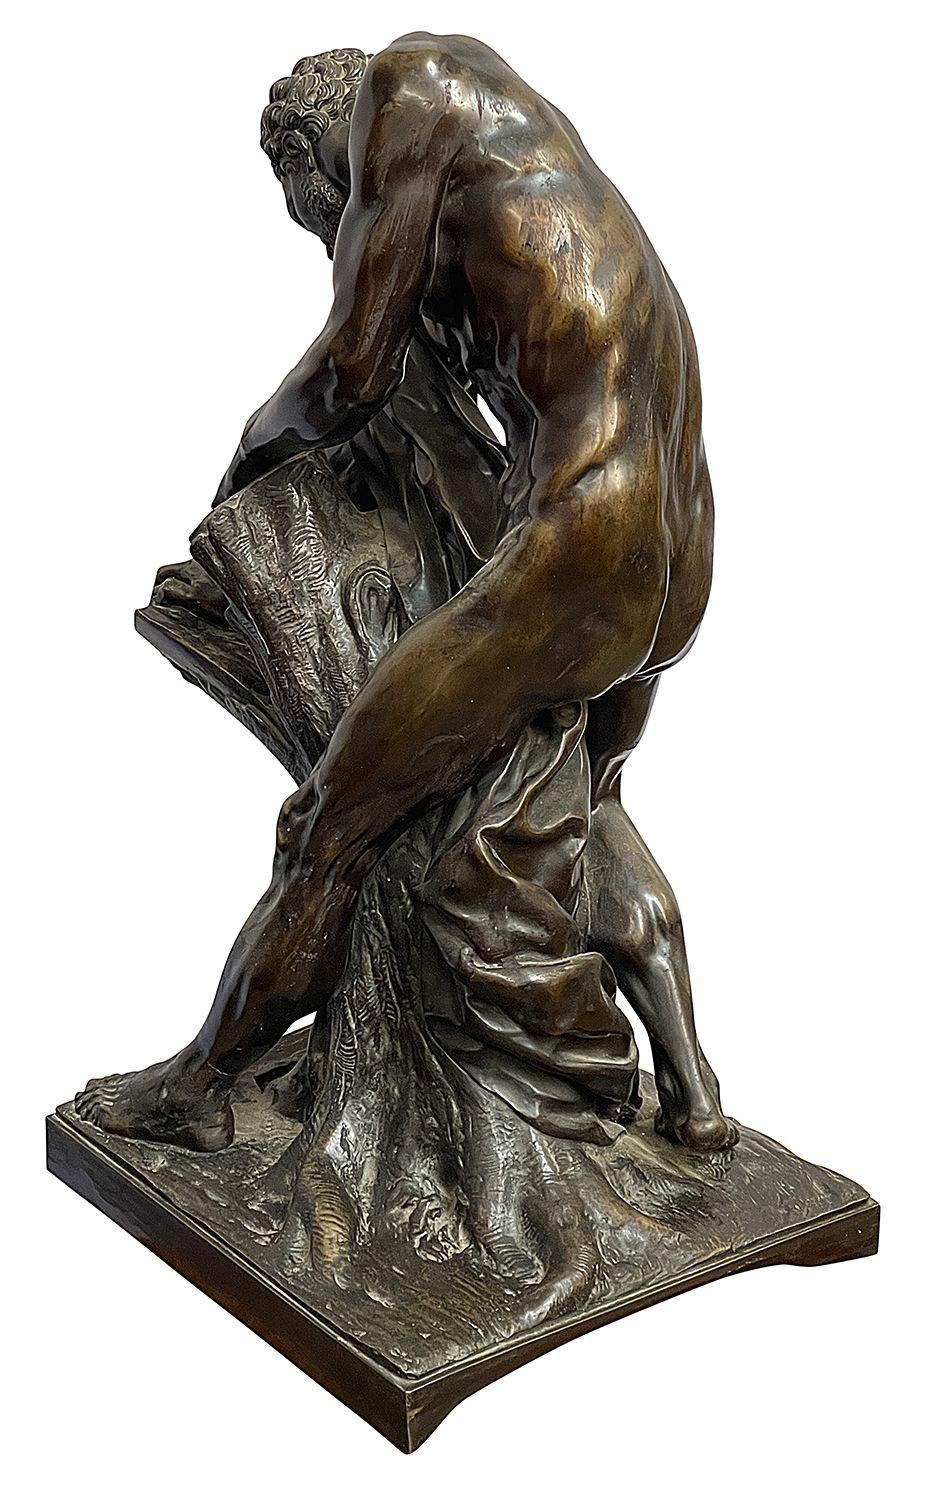 A very dramatic and classical 19th Century bronze statue of a bearded woods man splitting a tree trunk, circa 1860-80
 
 
 
Batch 73